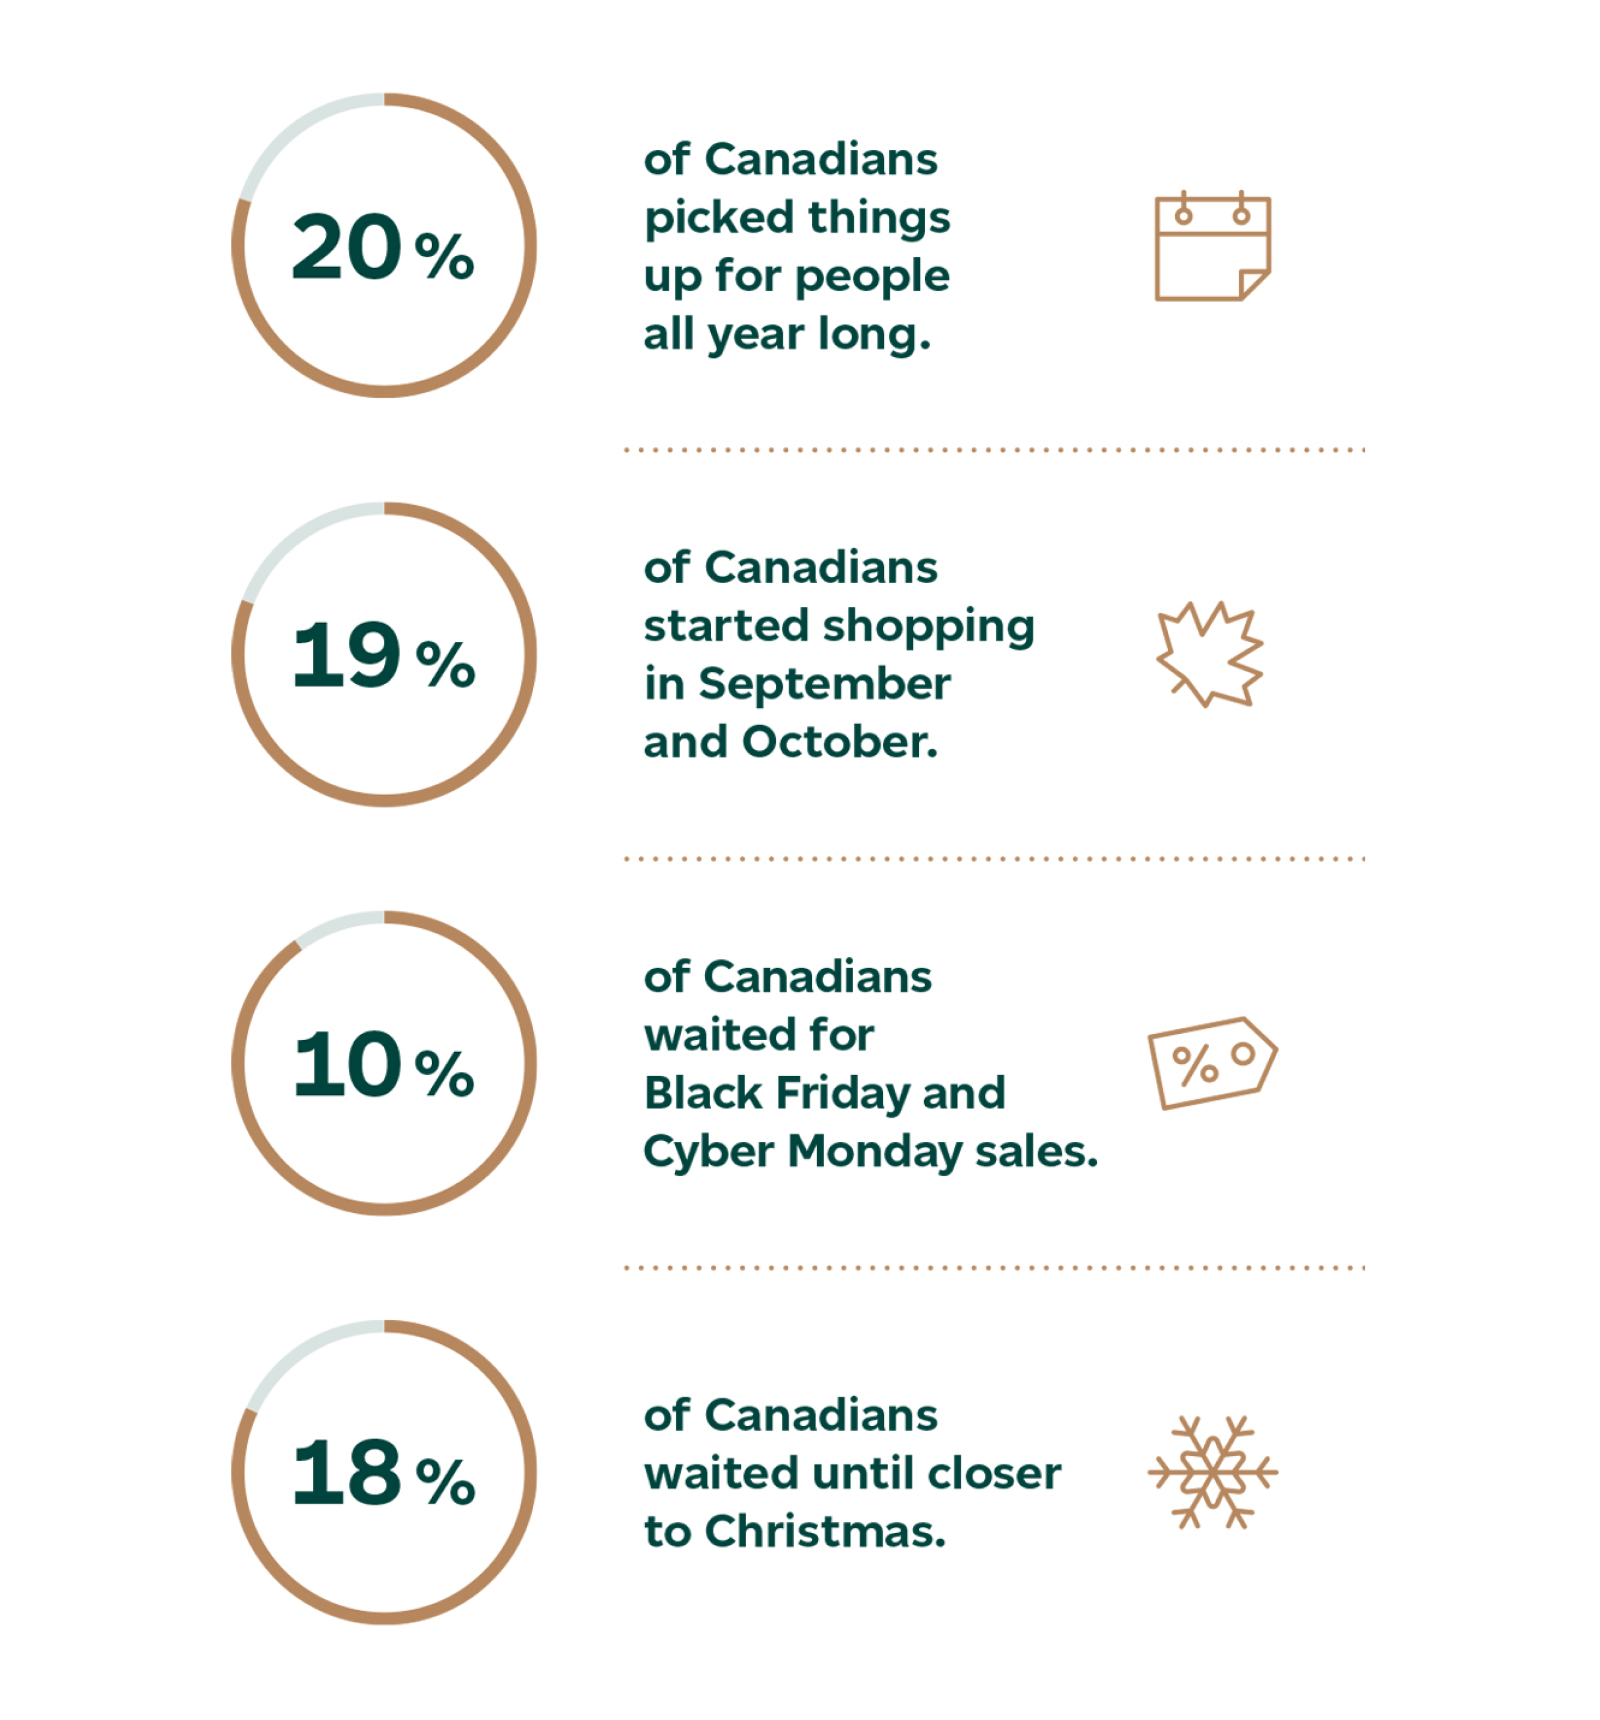 20% of Canadians picked things up for people all year long, 19% started shopping in September and October, 10% waited for Black Friday and Cyber Monday sales, 18% waited until closer to Christmas.